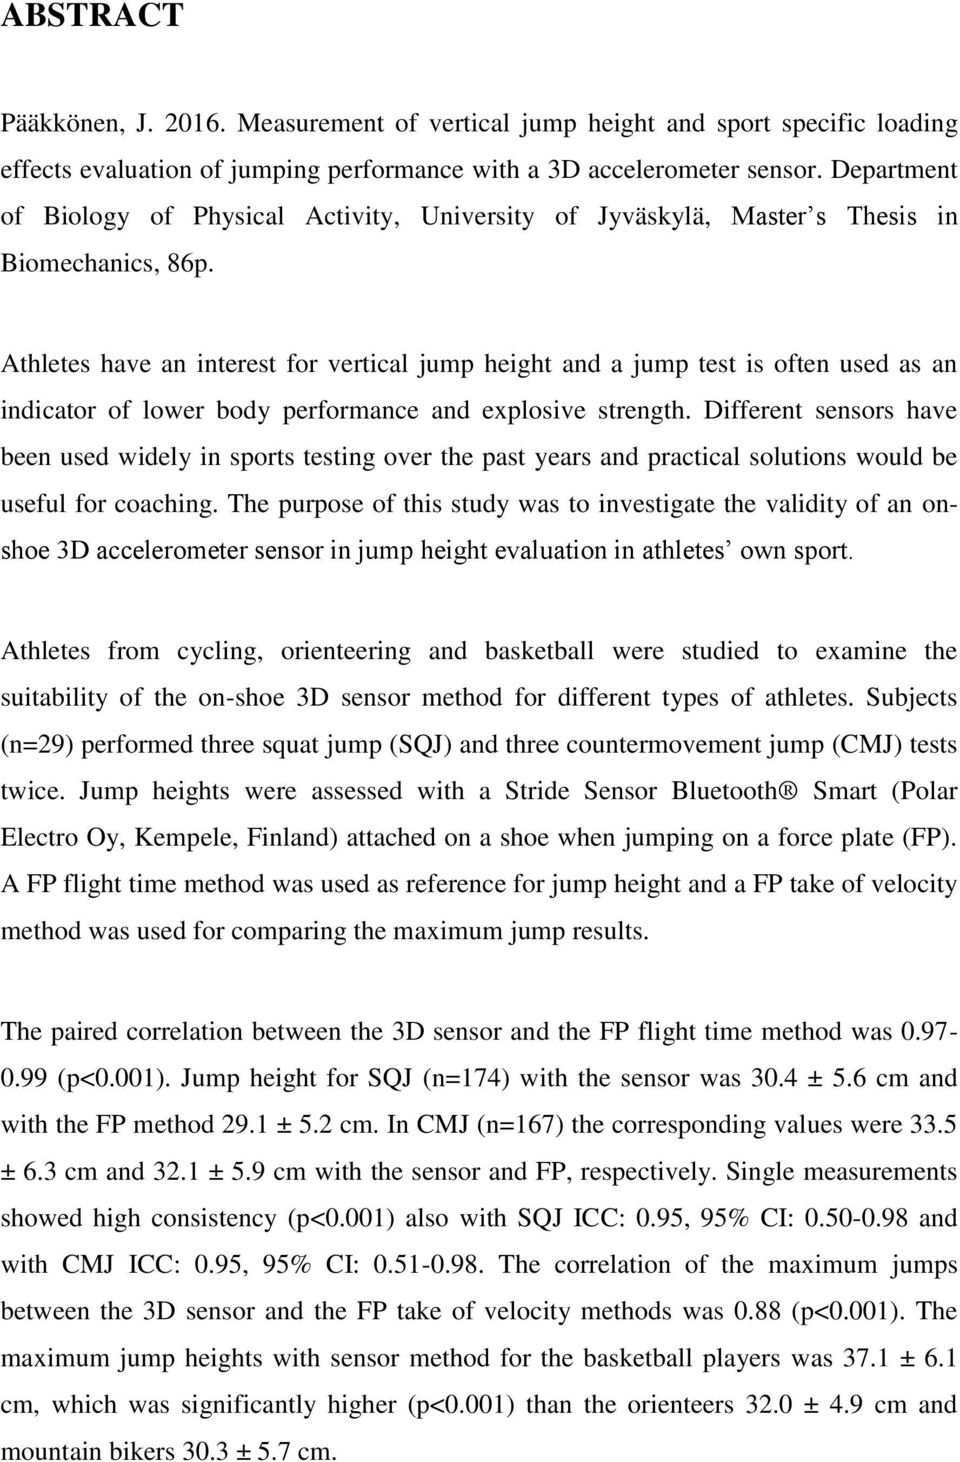 Athletes have an interest for vertical jump height and a jump test is often used as an indicator of lower body performance and explosive strength.